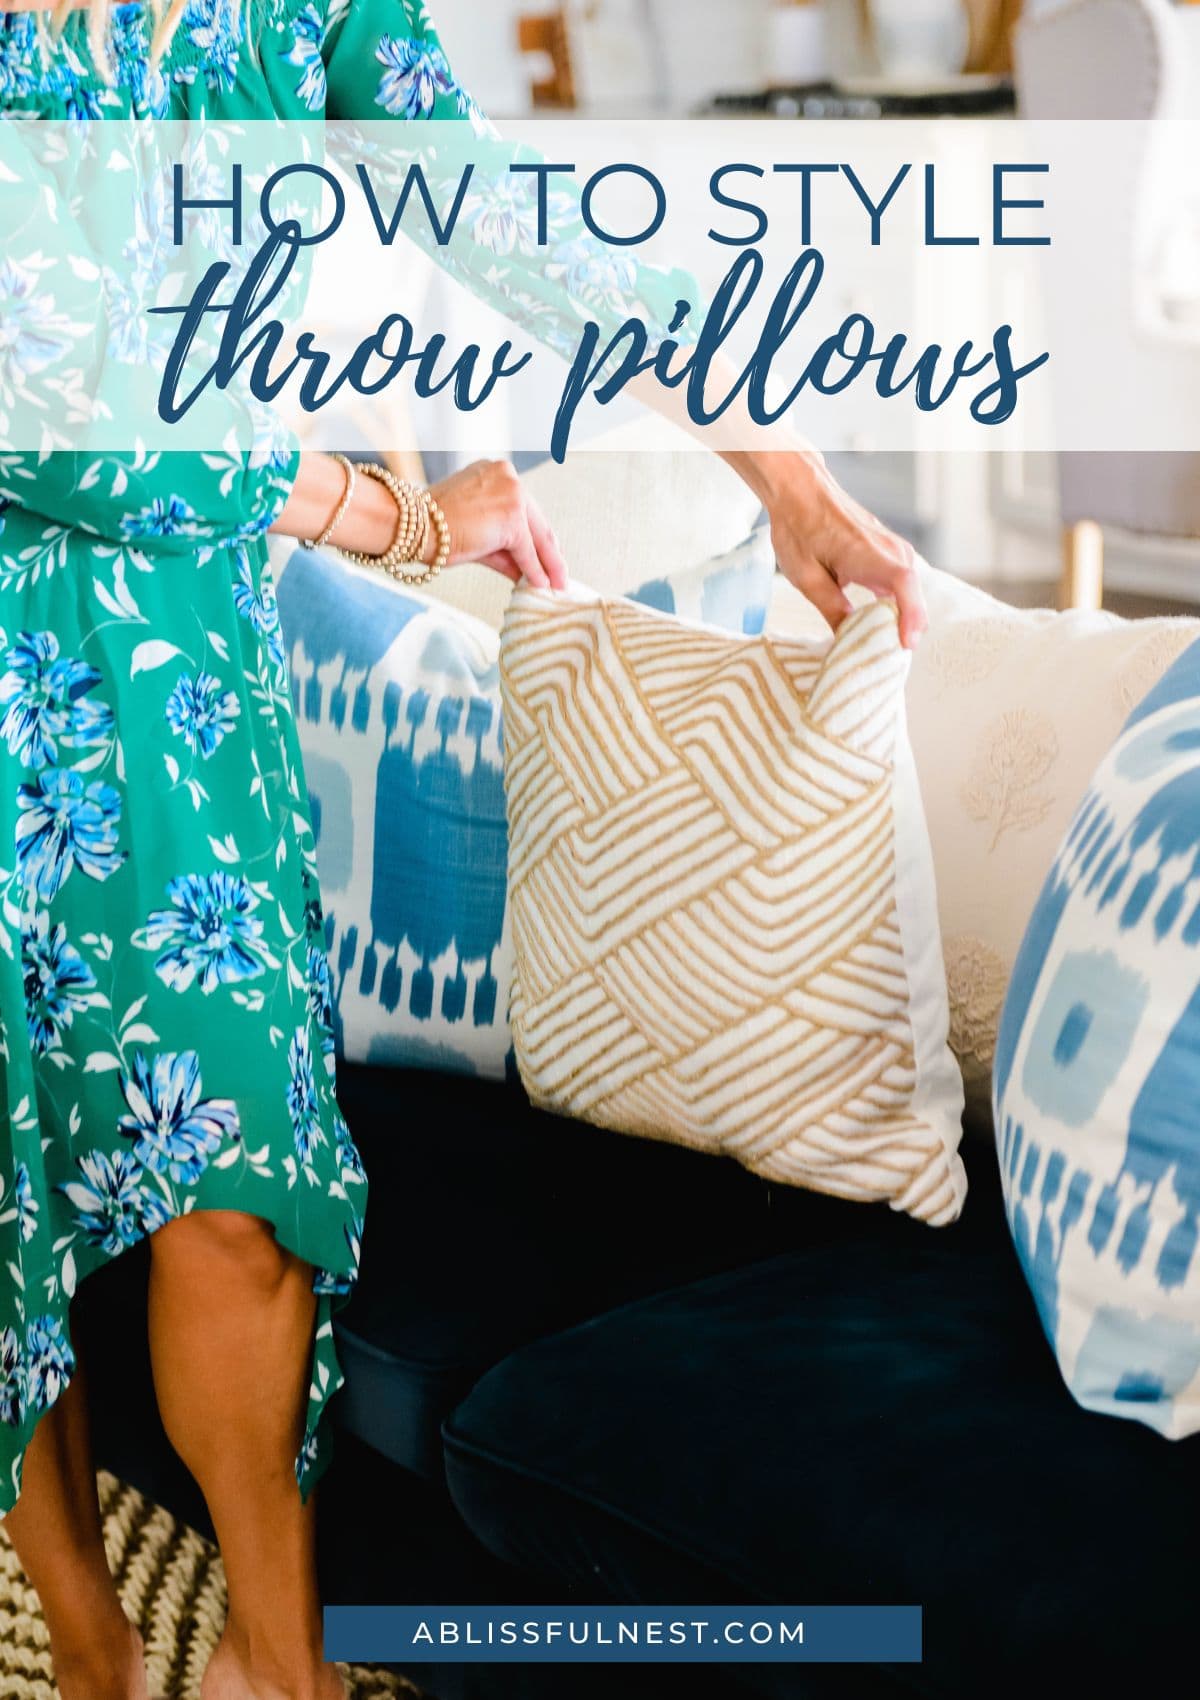 https://ablissfulnest.com/wp-content/uploads/2023/05/how-to-style-throw-pillows.jpeg